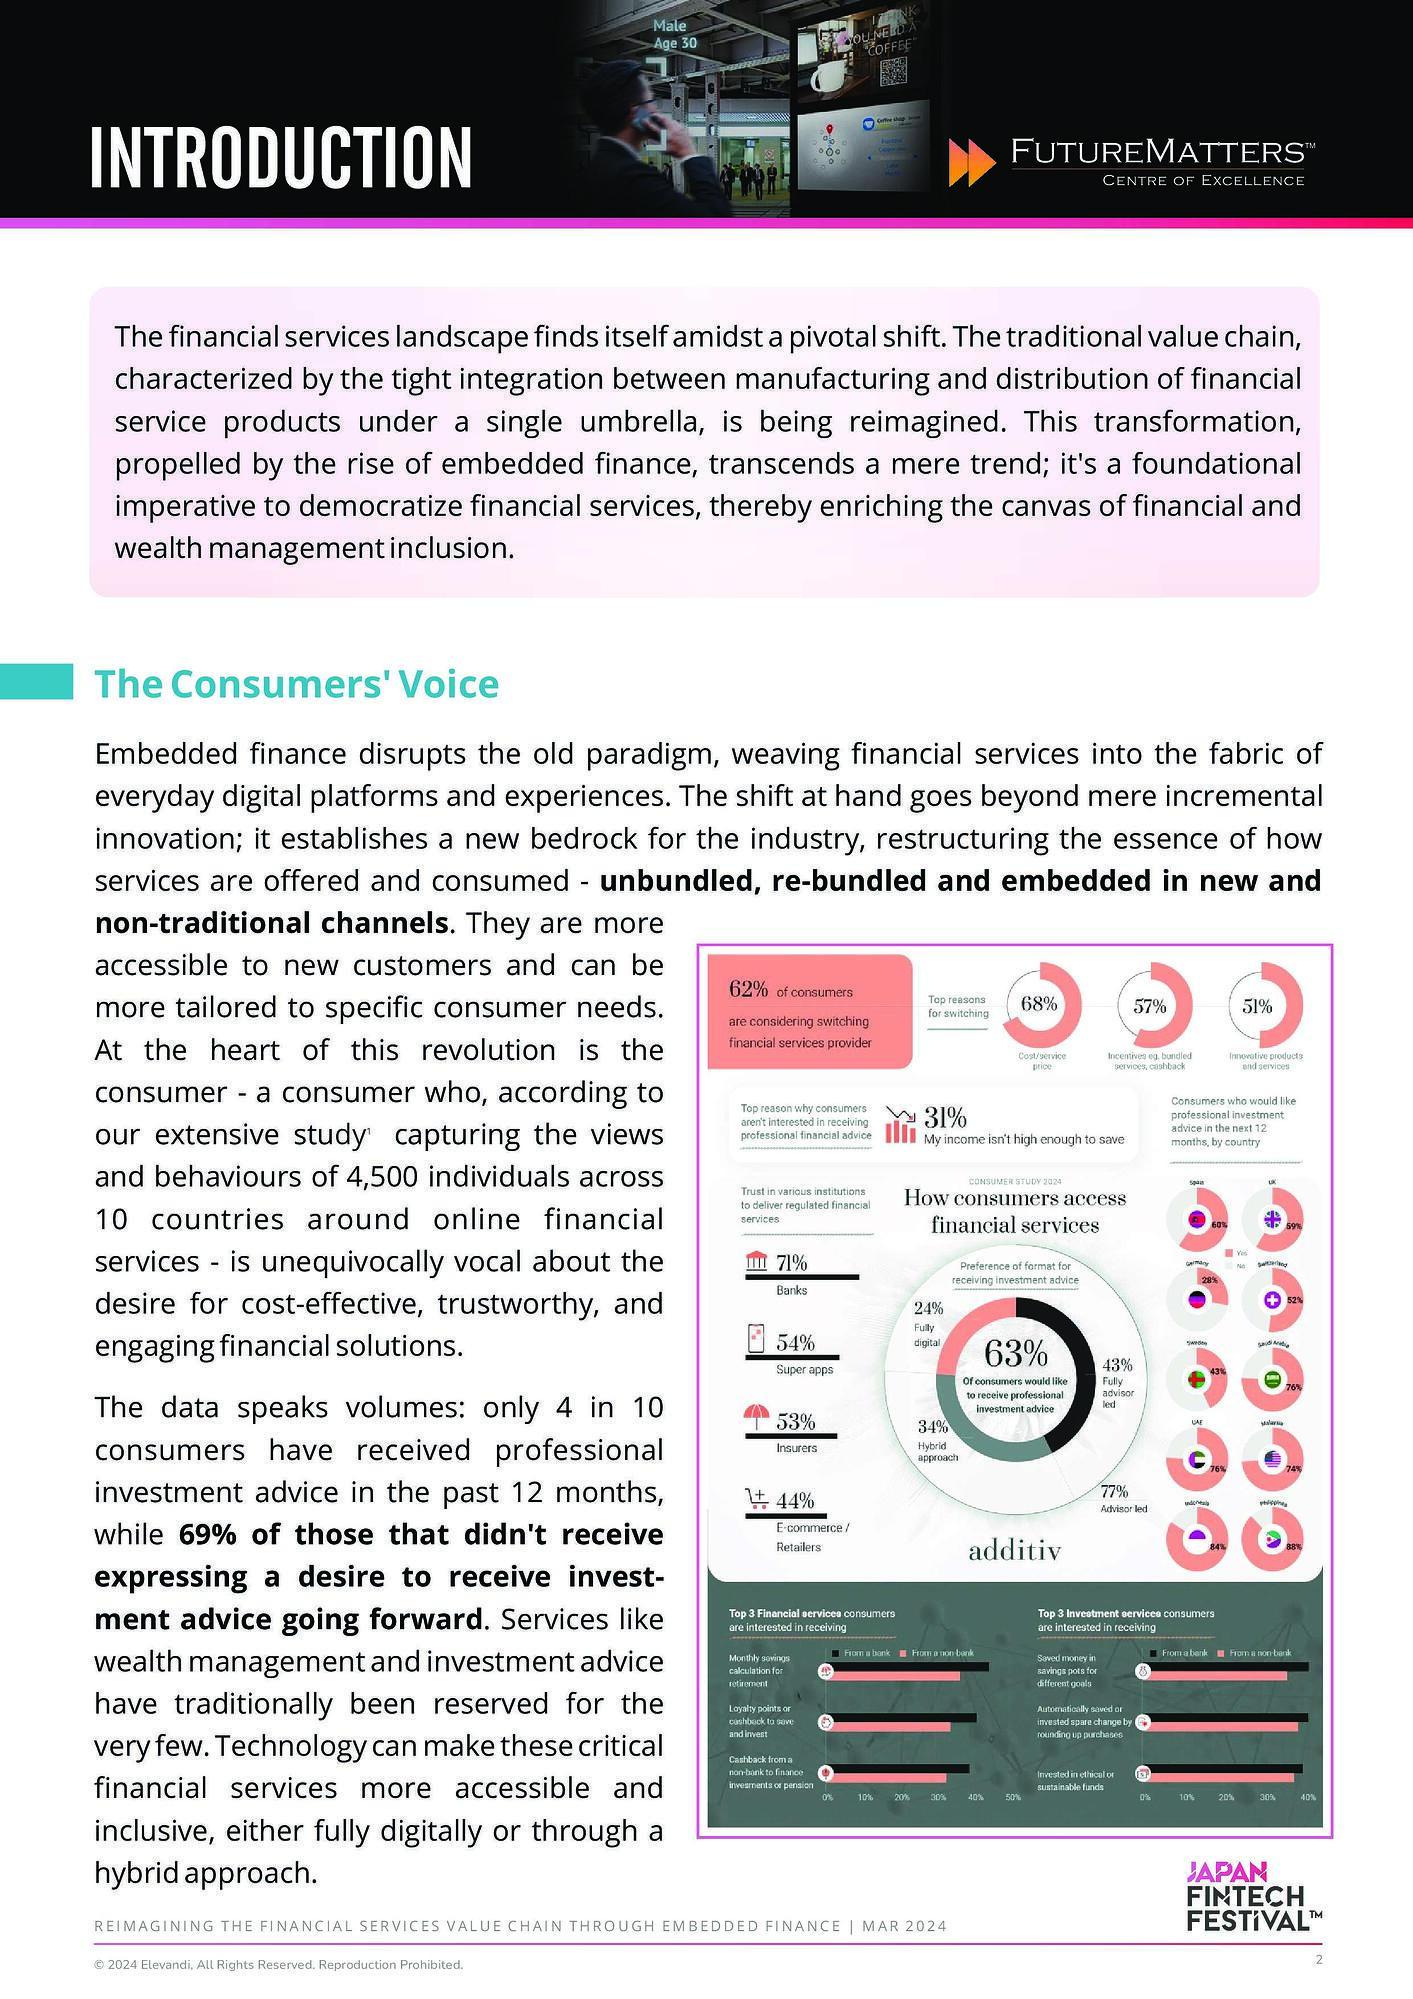 Re-Imagining The Financial Services Value Chain Through Embedded Finance-2